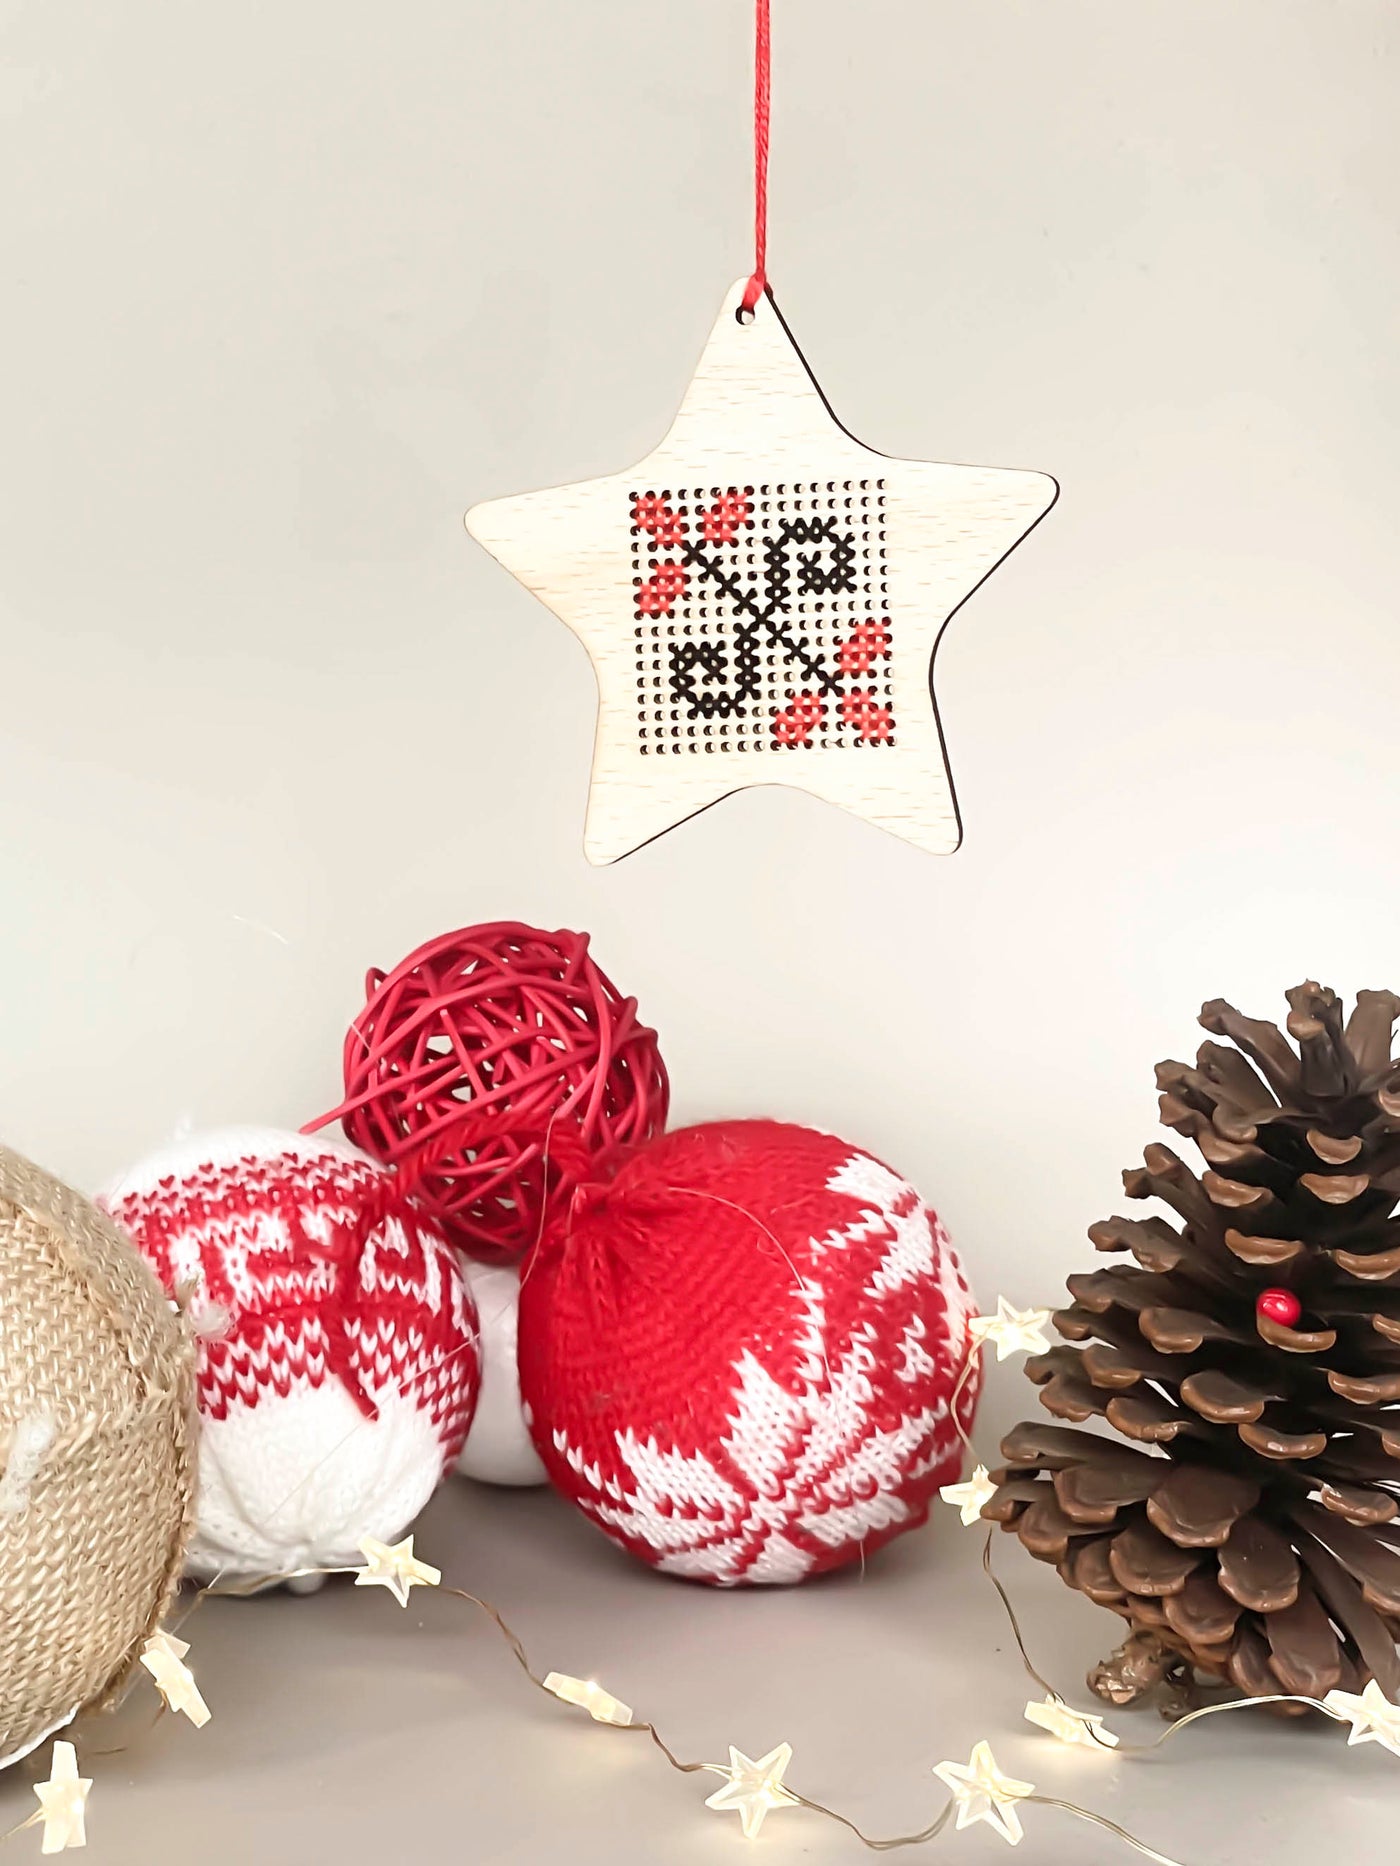 Hand Stitched Star Ornament - Aries Horns Motif